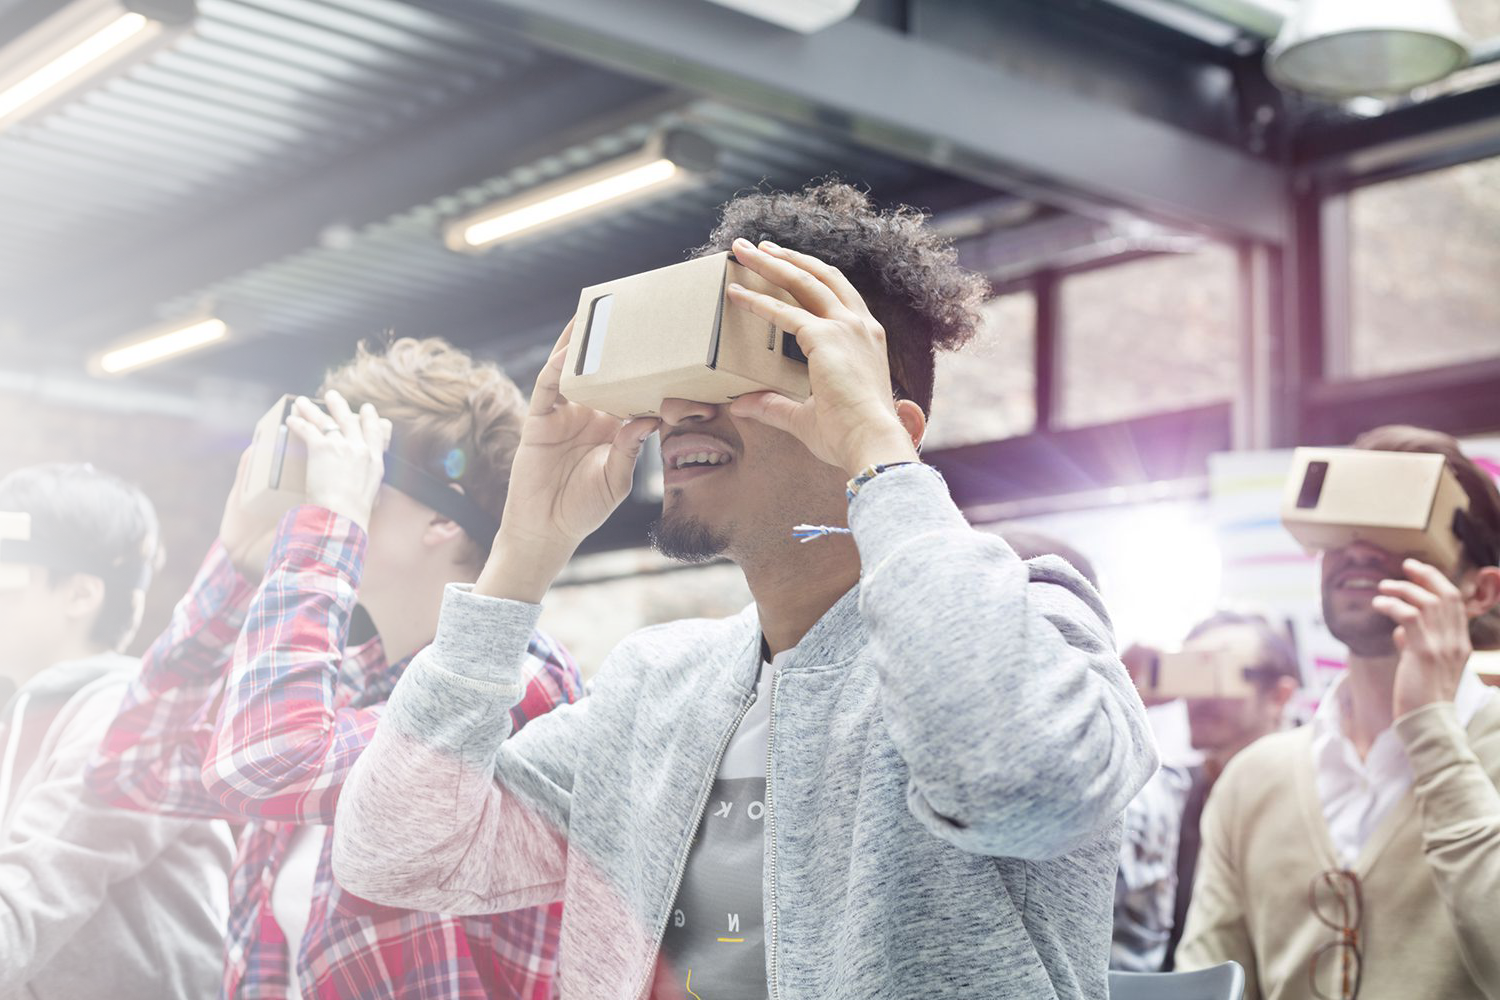 How Virtual Reality could become a marketing opportunity